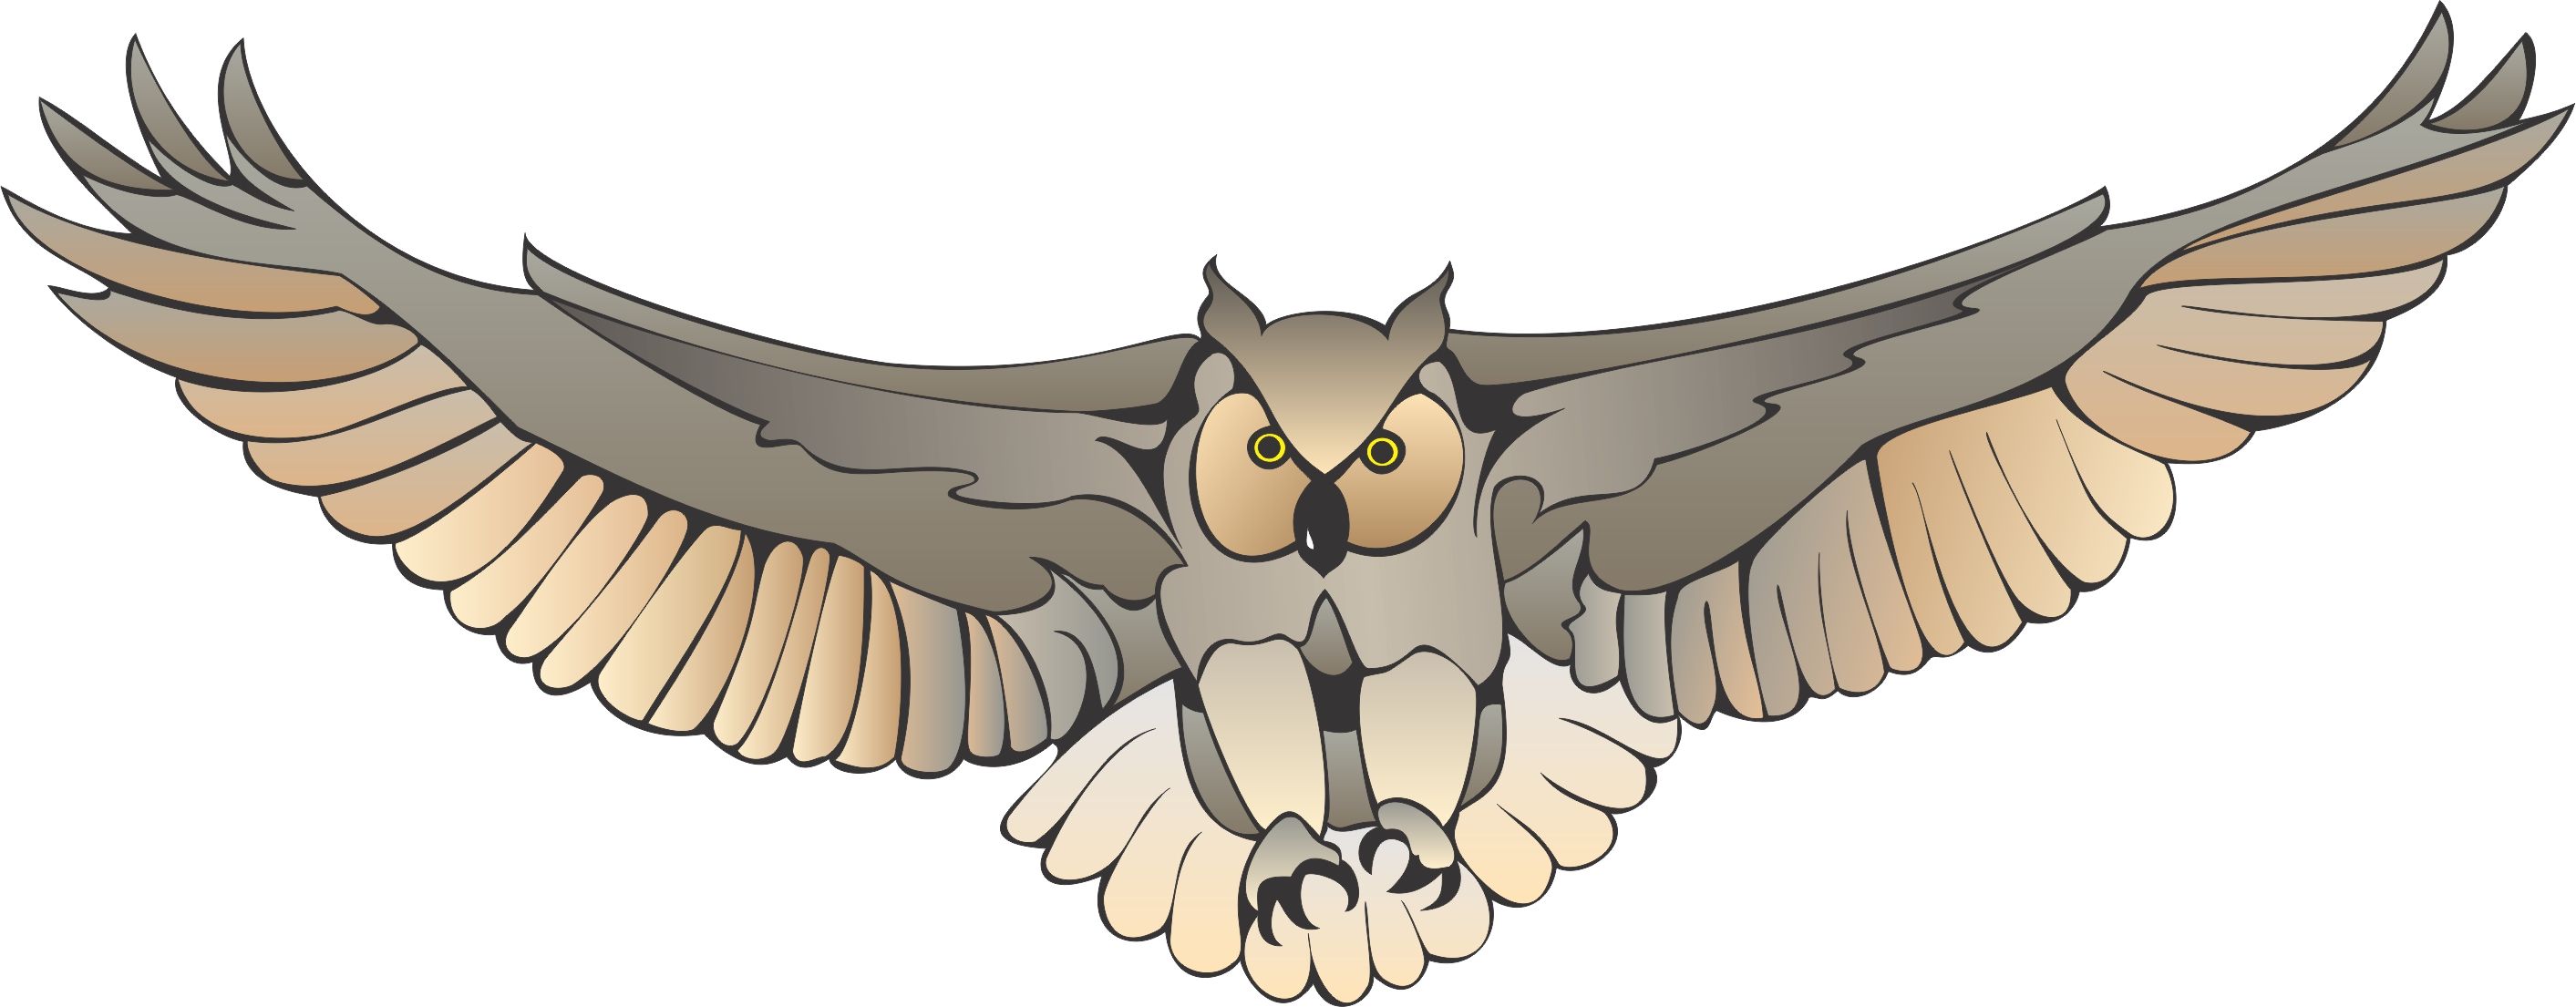 owls clipart flying